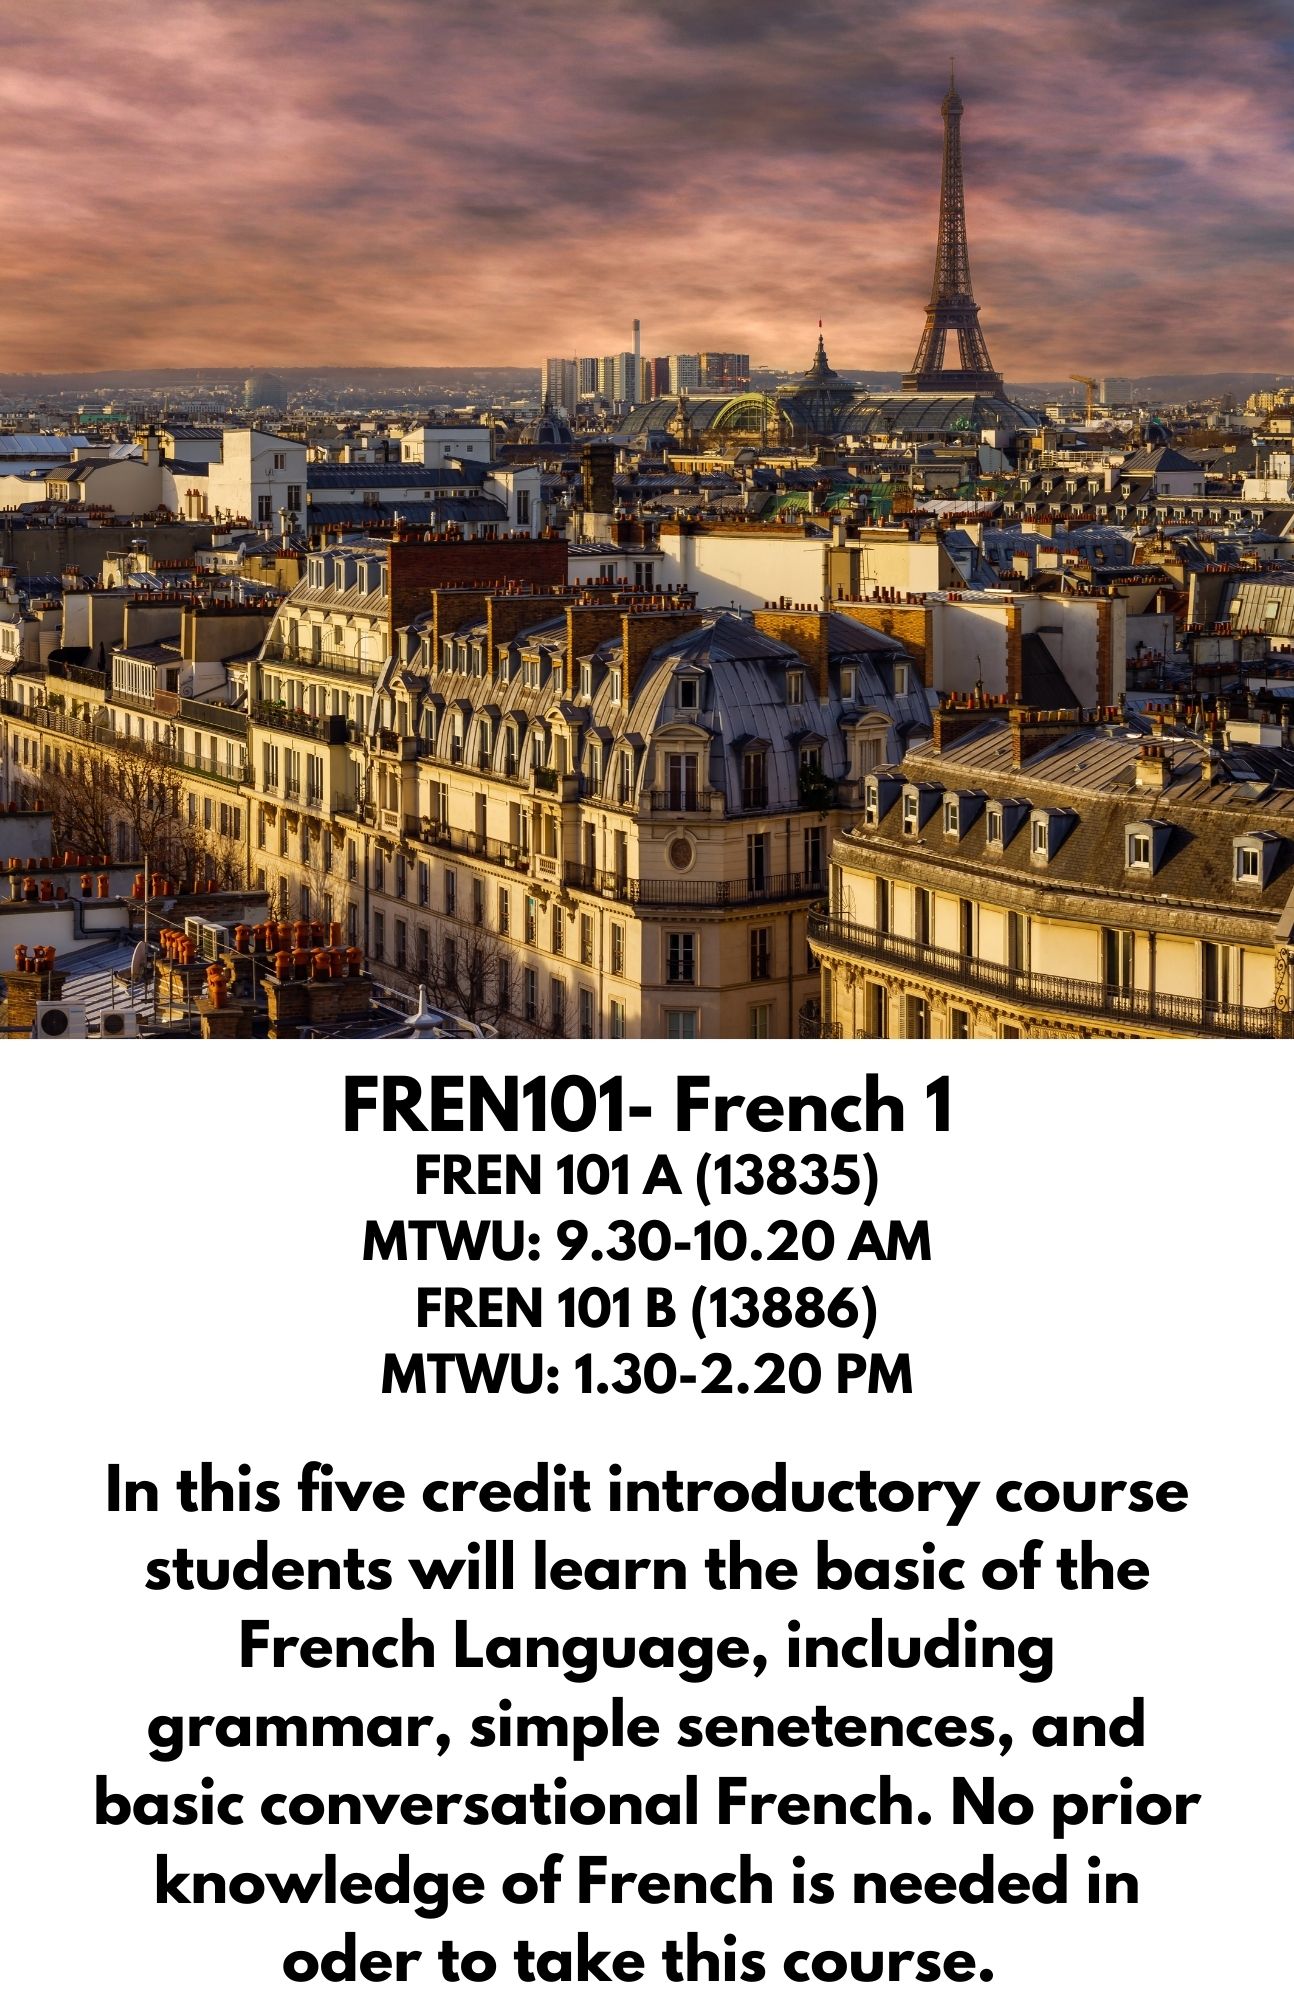 FREN101- French 1. FREN 101 A (13835) MTWU: 9.30-10.20 AM FREN 101 B (13886) MTWU: 1.30-2.20 PM. In this five credit introductory course students will learn the basic of the French Language, including grammar, simple senetences, and basic conversational French. No prior knowledge of French is needed in oder to take this course.